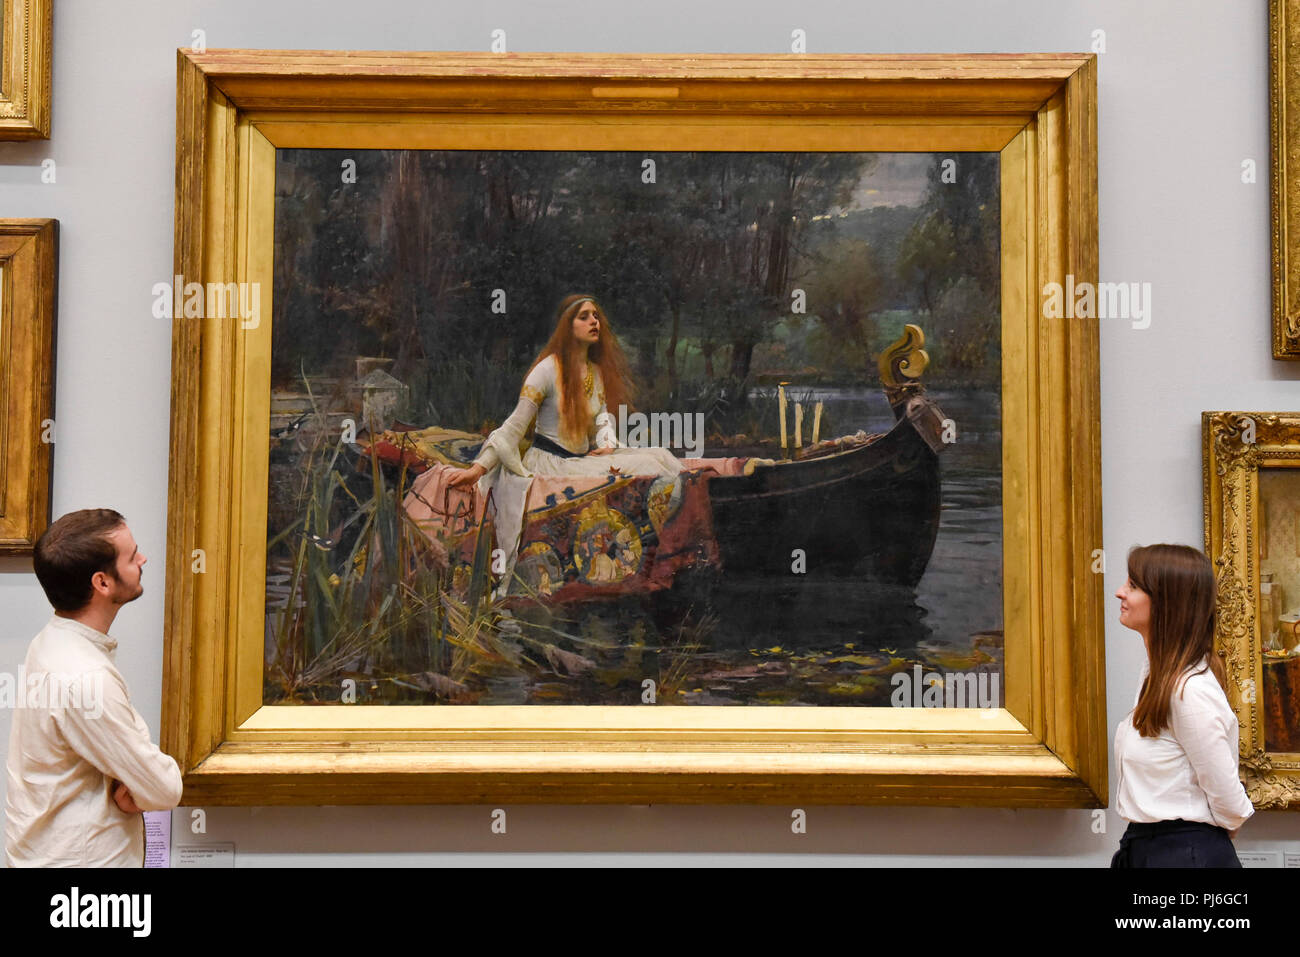 London, UK.  5 September 2018.  Staff members view 'The Lady of Shalott', 1888, by John William Waterhouse, at Tate Britain, to mark the launch of a major new exhibition at the National Gallery of Australia (NGA) in December 2018.  Over forty Pre-Raphaelite works will be loaned by Tate to NGA, which have never been shown in Australia until now, including 'Ophelia', 1851-52, by John Everett Millais and 'The Lady of Shalott', 1888, by John William Waterhouse. Credit: Stephen Chung / Alamy Live News Stock Photo